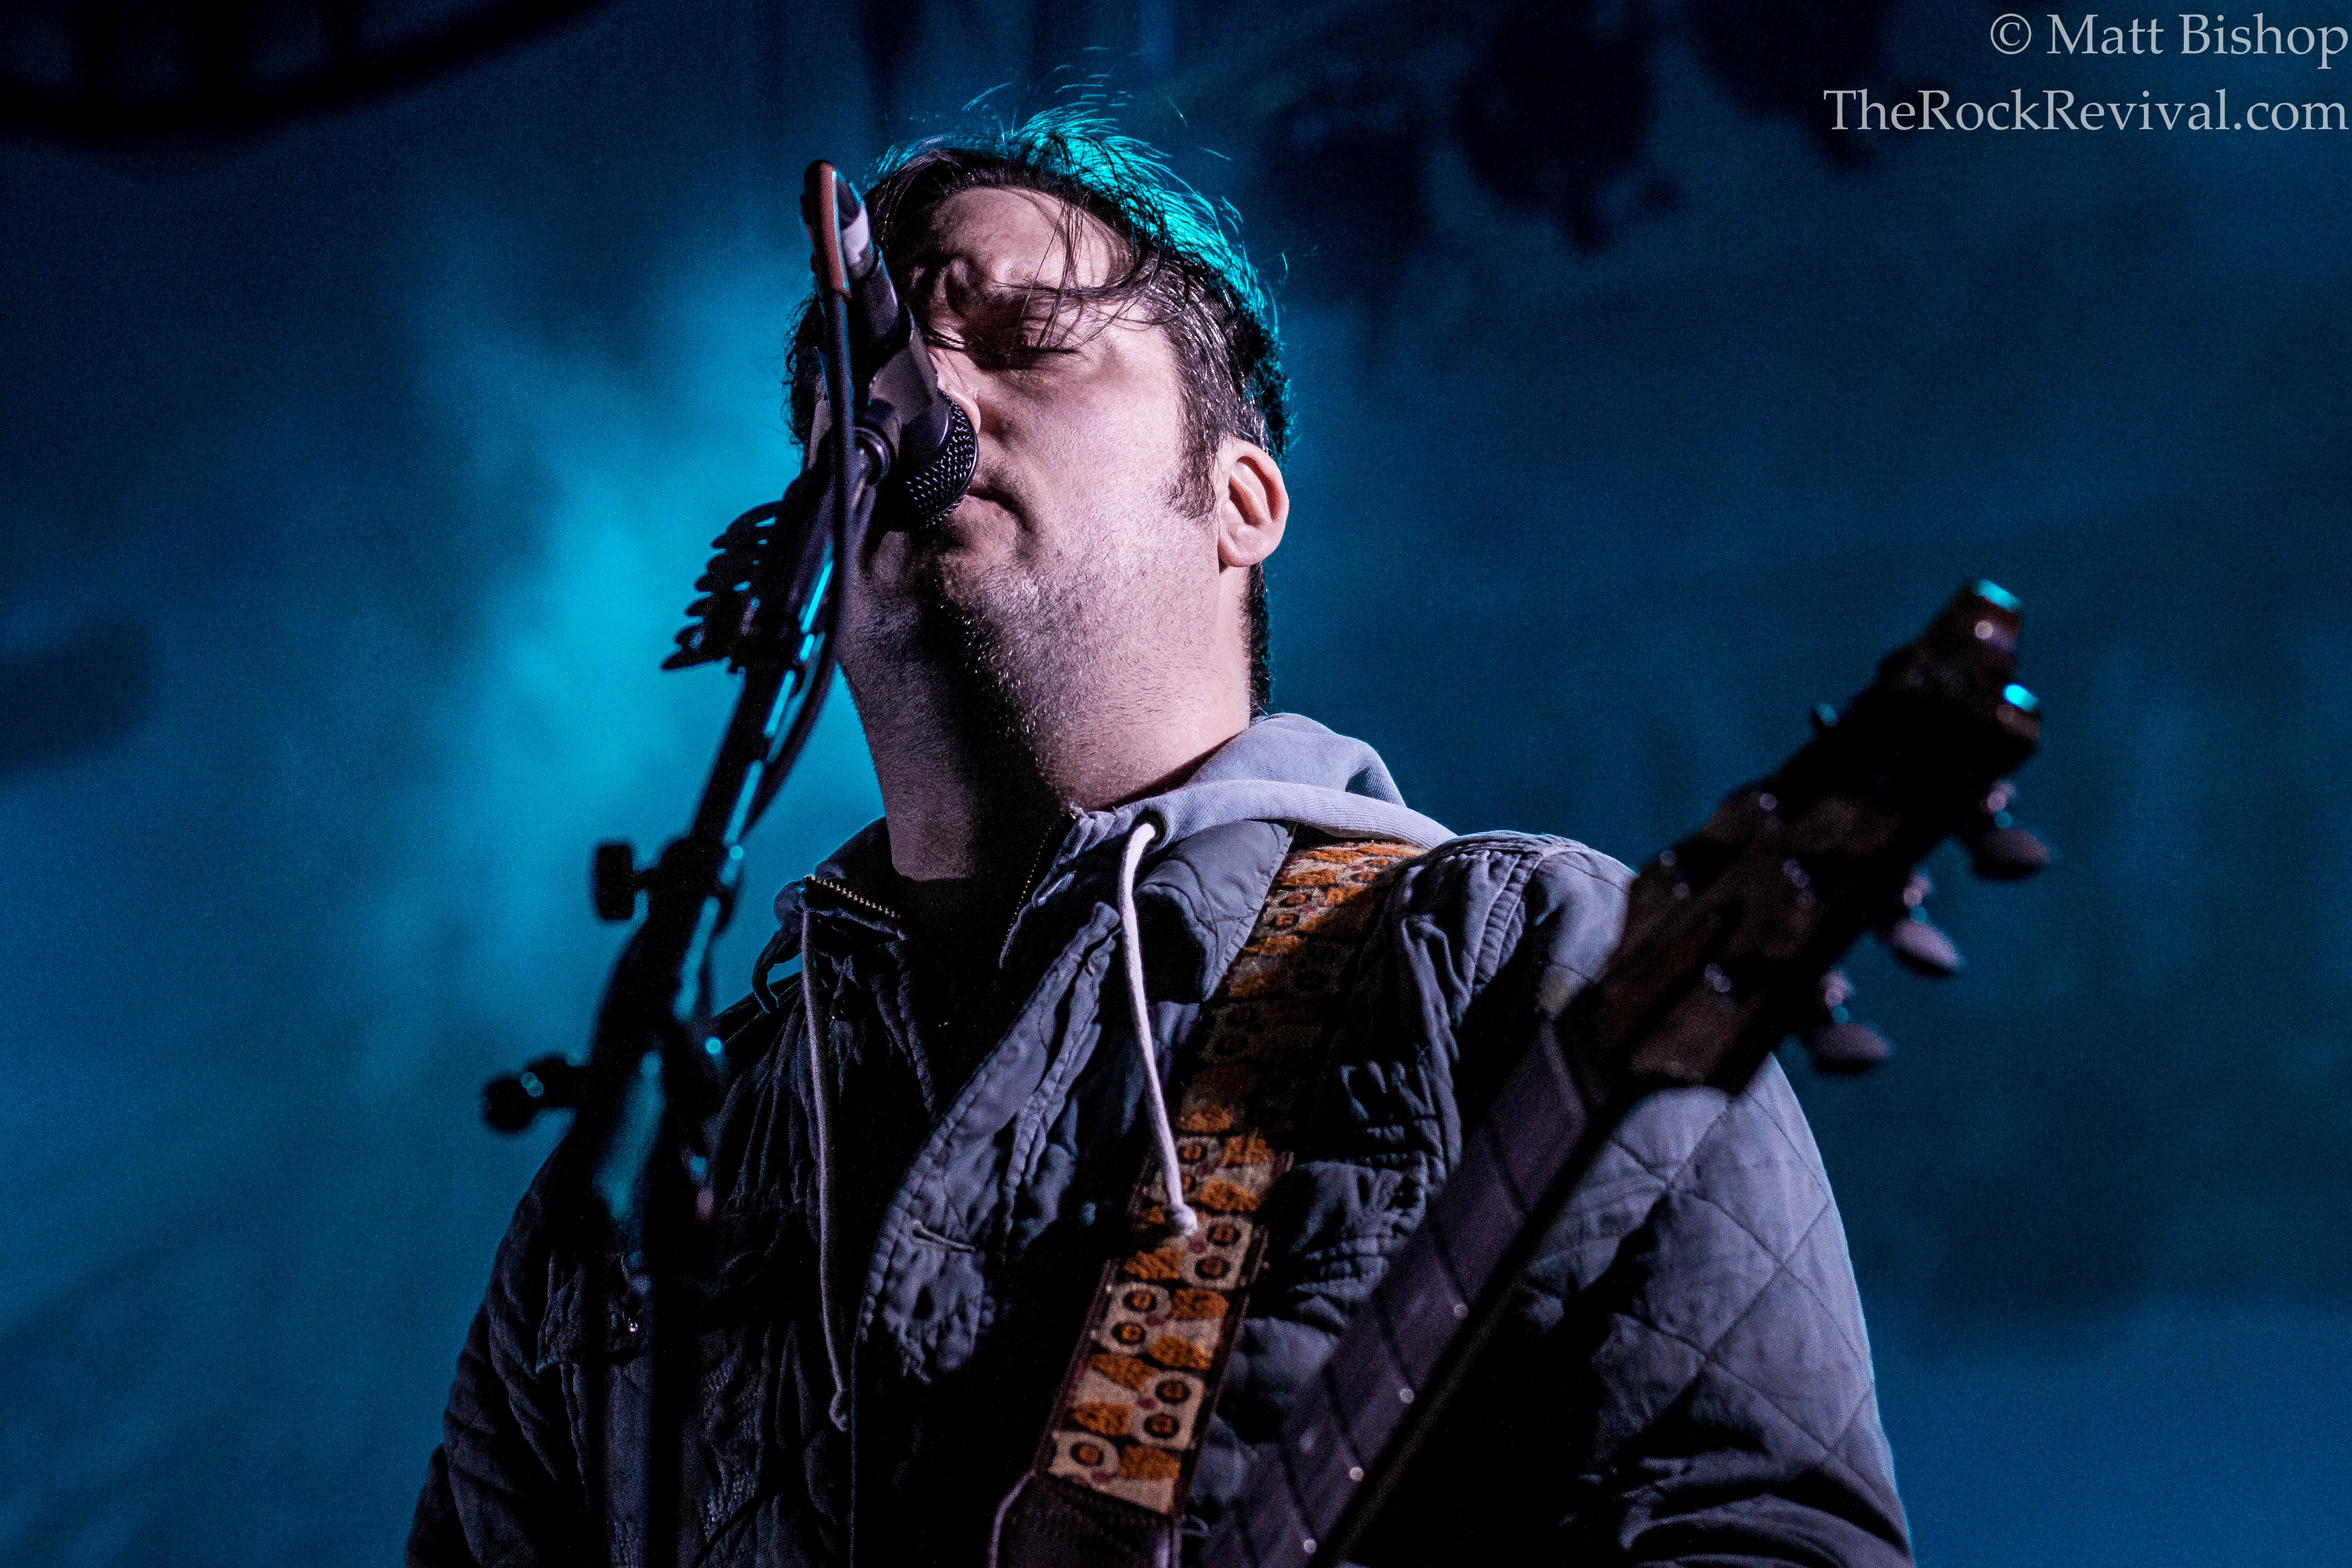 MODEST MOUSE – Live Photo Gallery